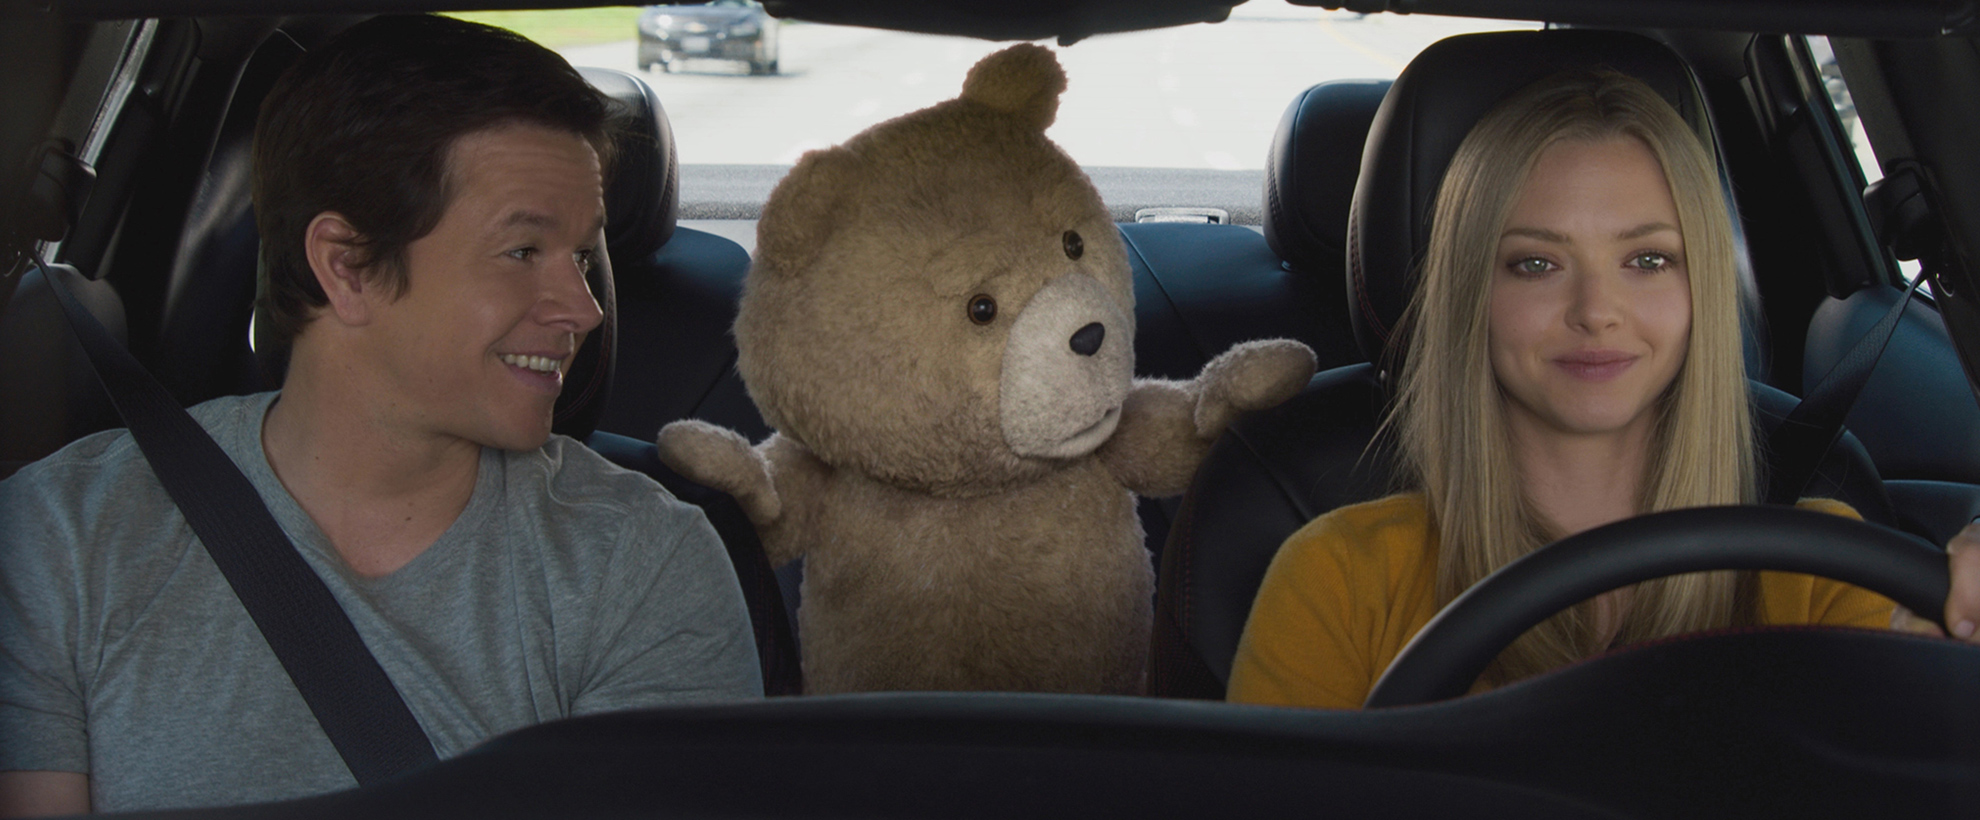 Amanda Seyfried drives a car with Mark Whalberg in the passenger seat. Ted, an alive teddy bear, pokes his head from the back seat to talk to the two in front